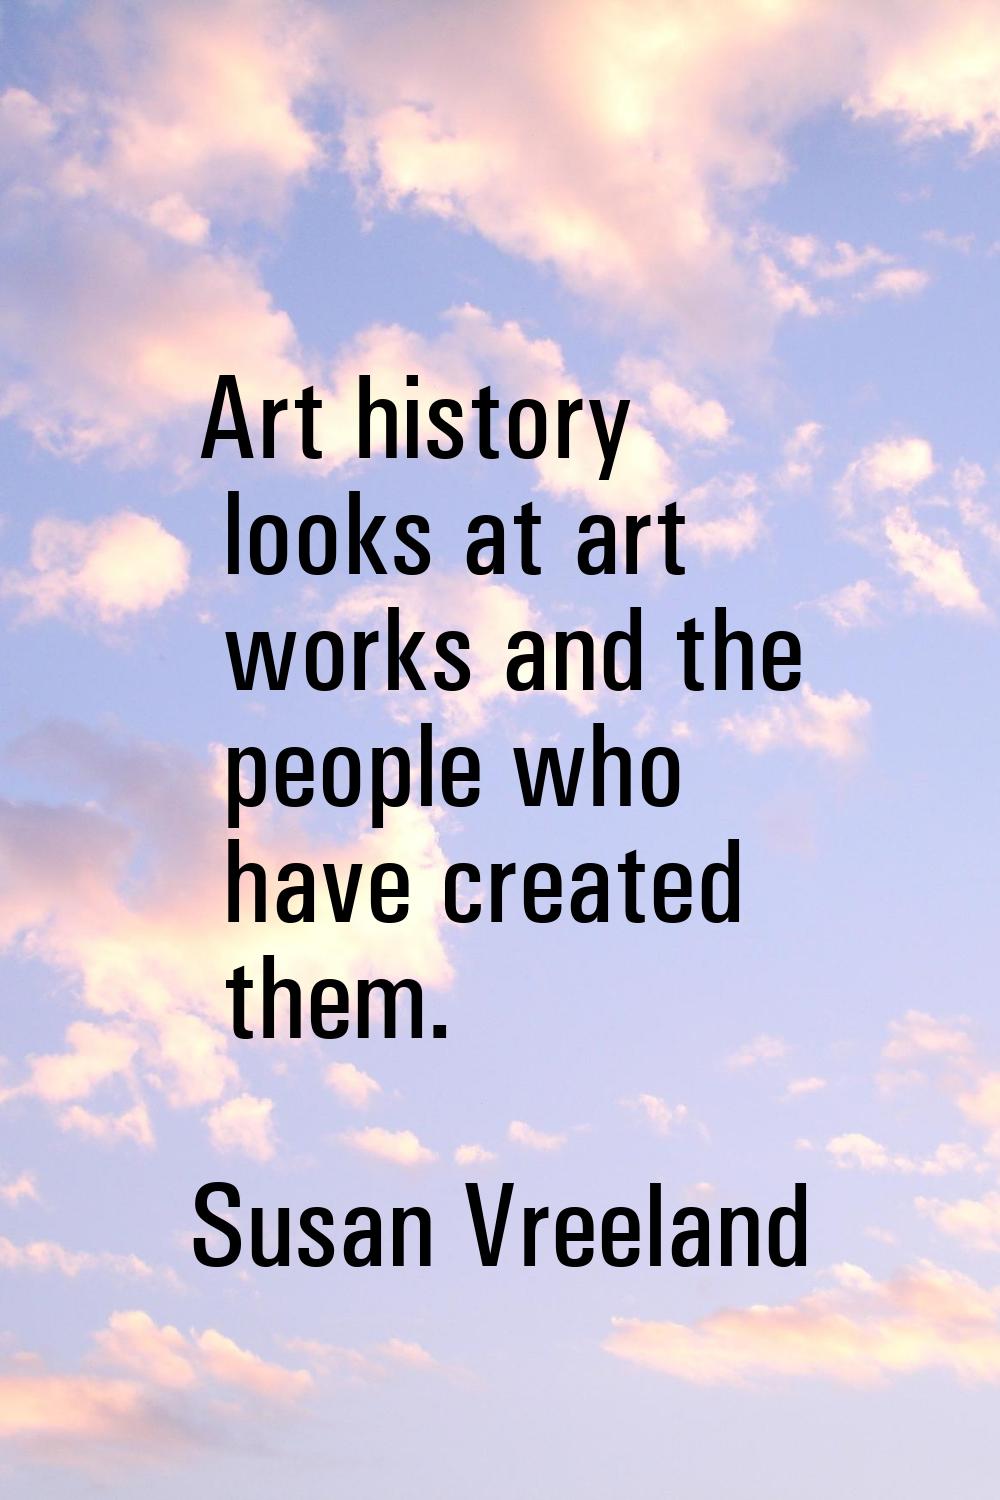 Art history looks at art works and the people who have created them.